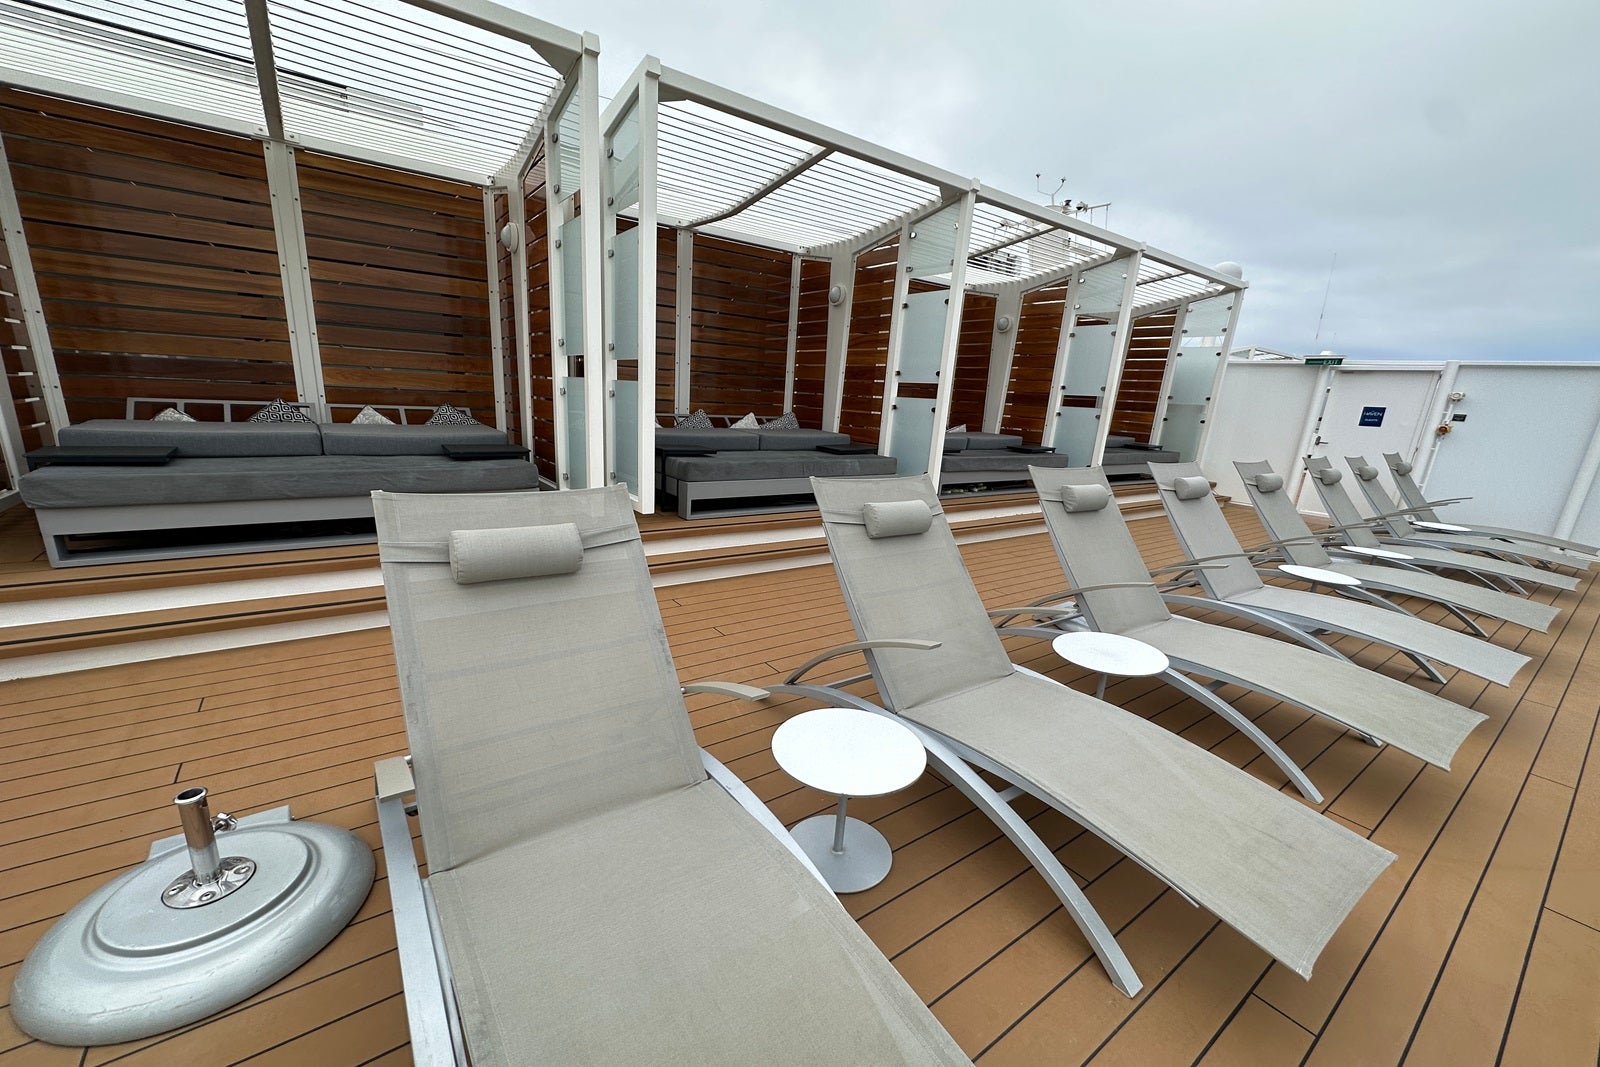 A row of deck chairs on a cruise ship sun deck in front of a row of padded cabana alcoves